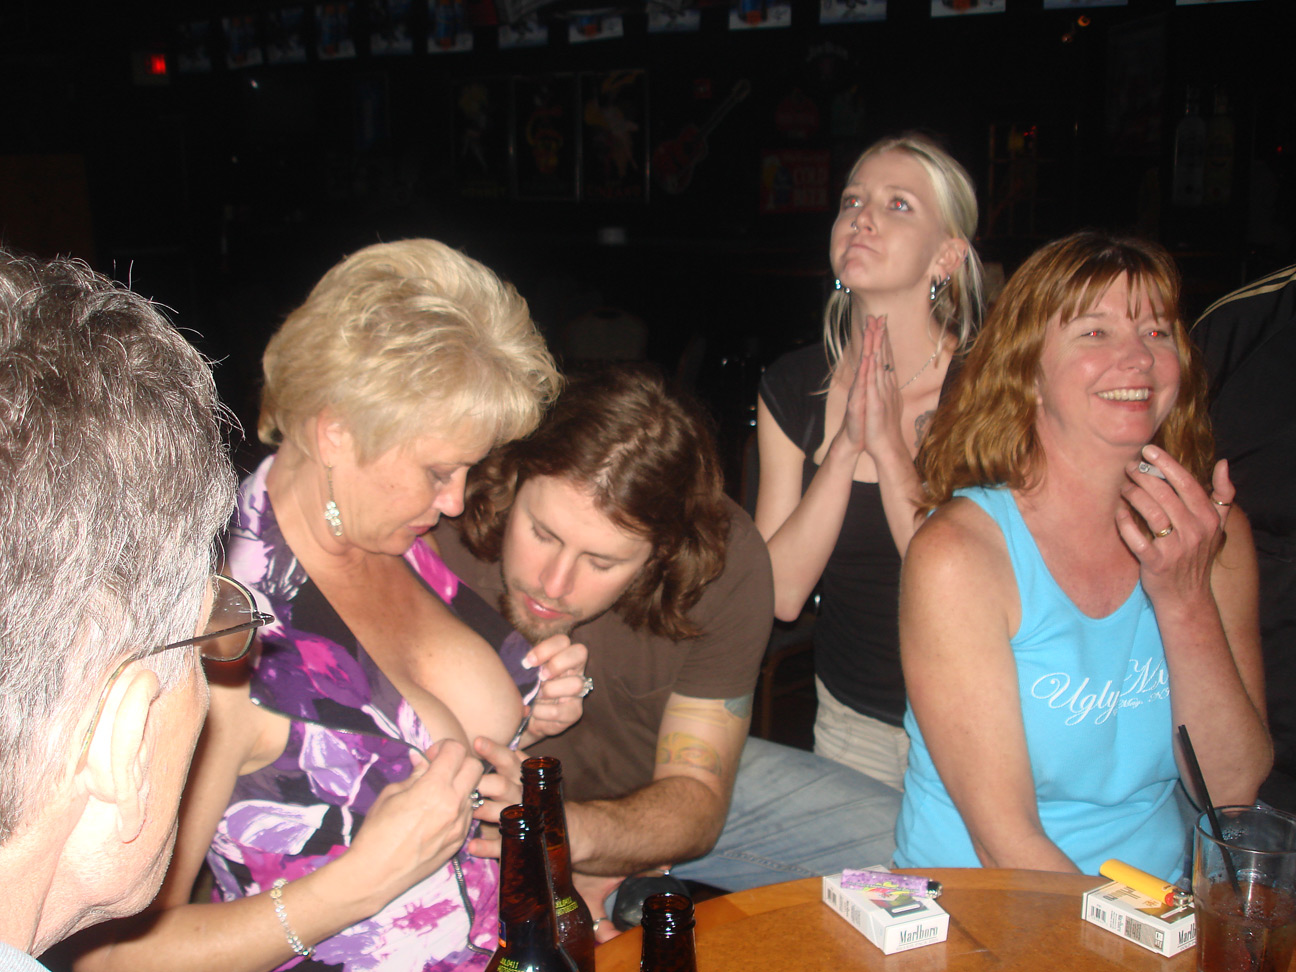 Our Real Tampa Swingers Monthly Bar Meet And Greet photo